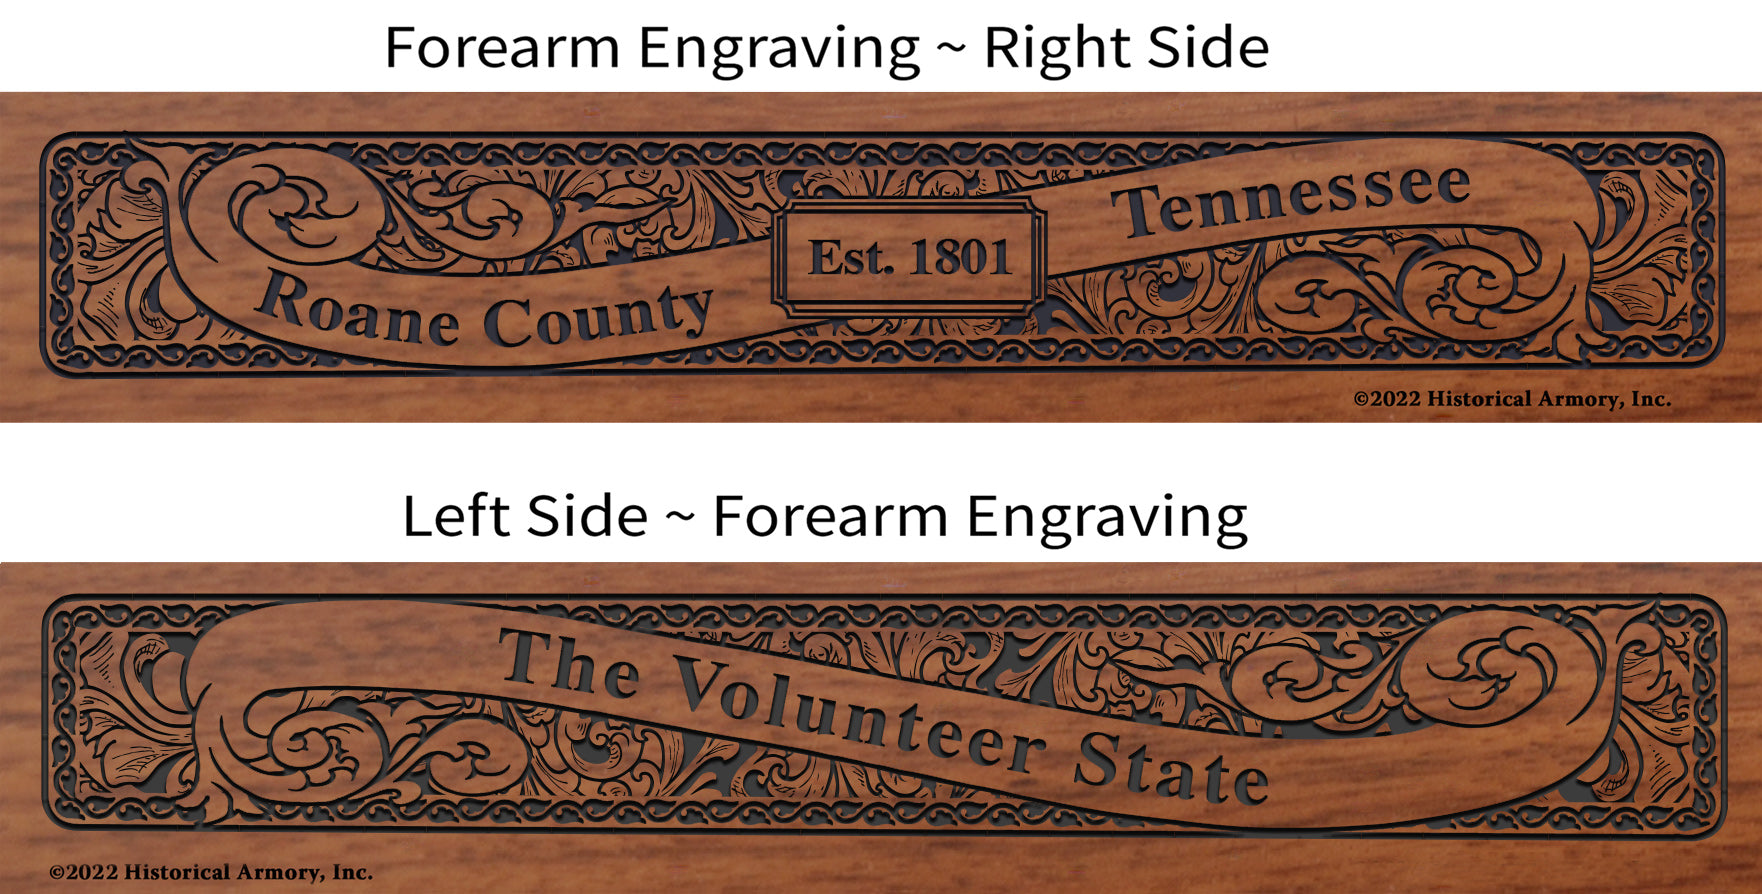 Roane County Tennessee Engraved Rifle Forearm